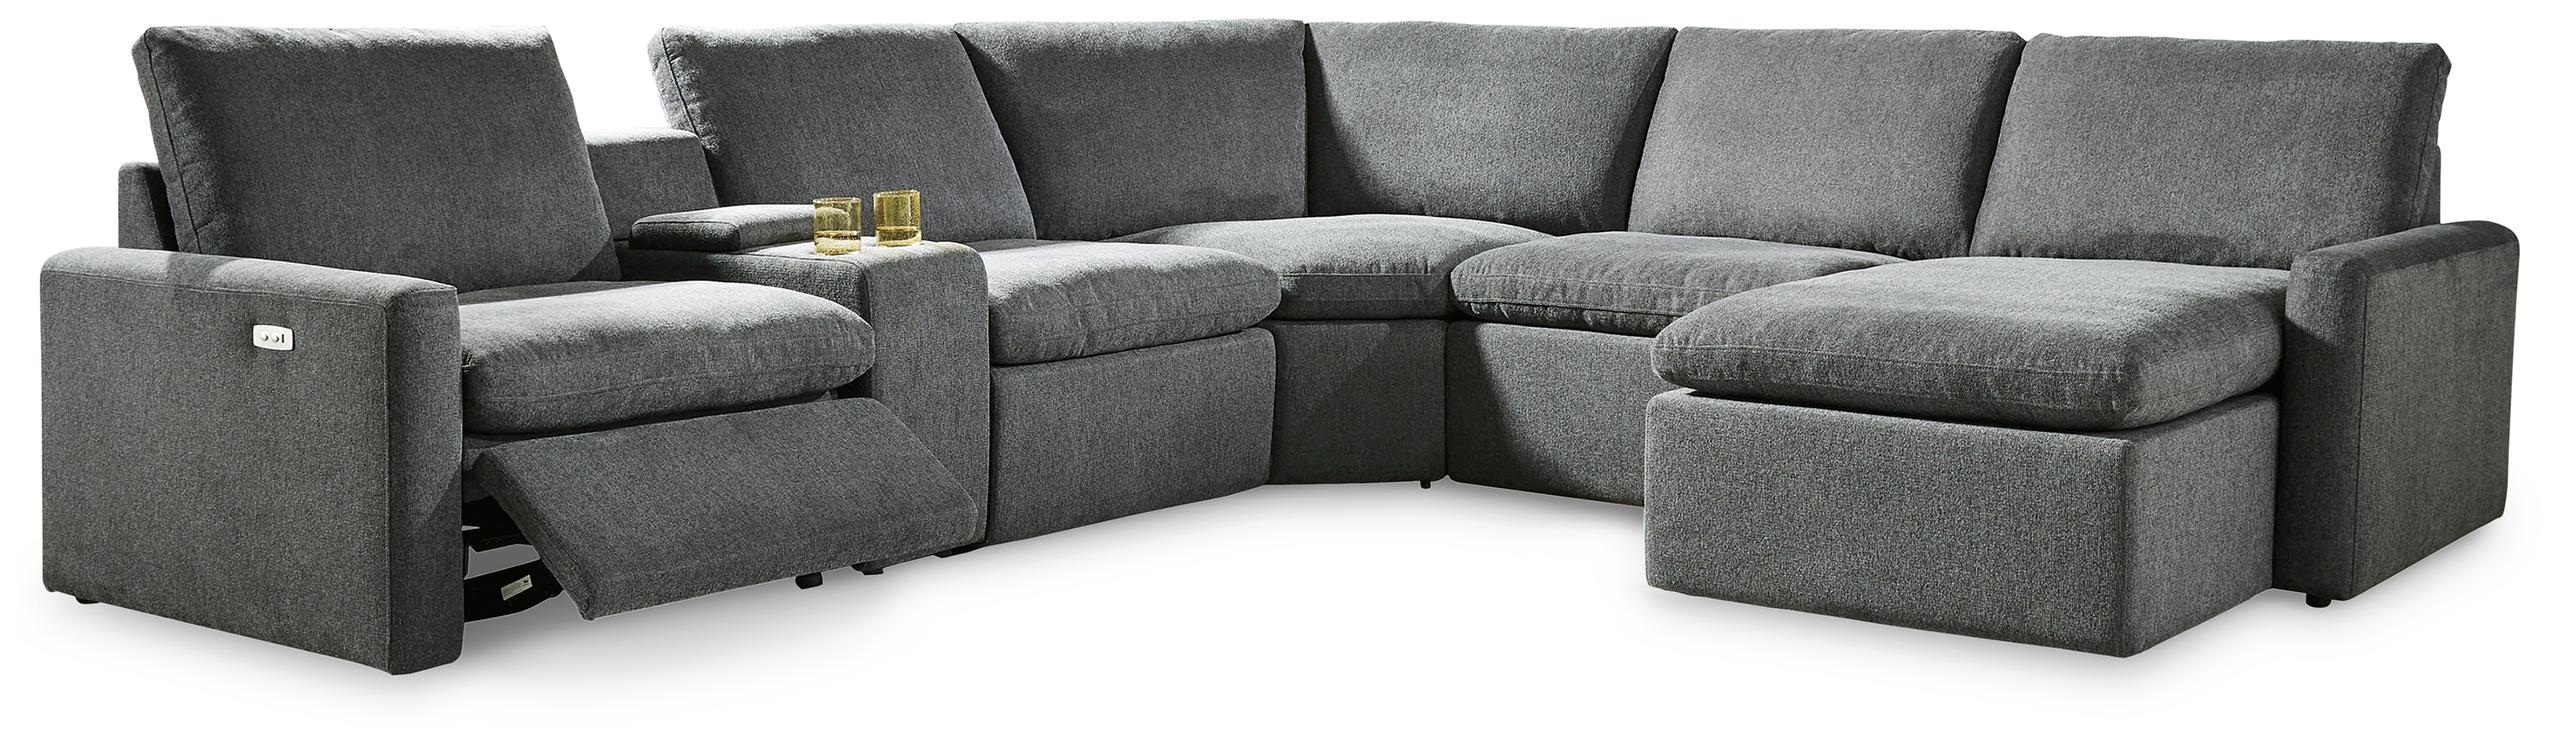 ASHLEY FURNITURE 60508S8 Hartsdale 6-piece Right Arm Facing Reclining Sectional With Console and Chaise